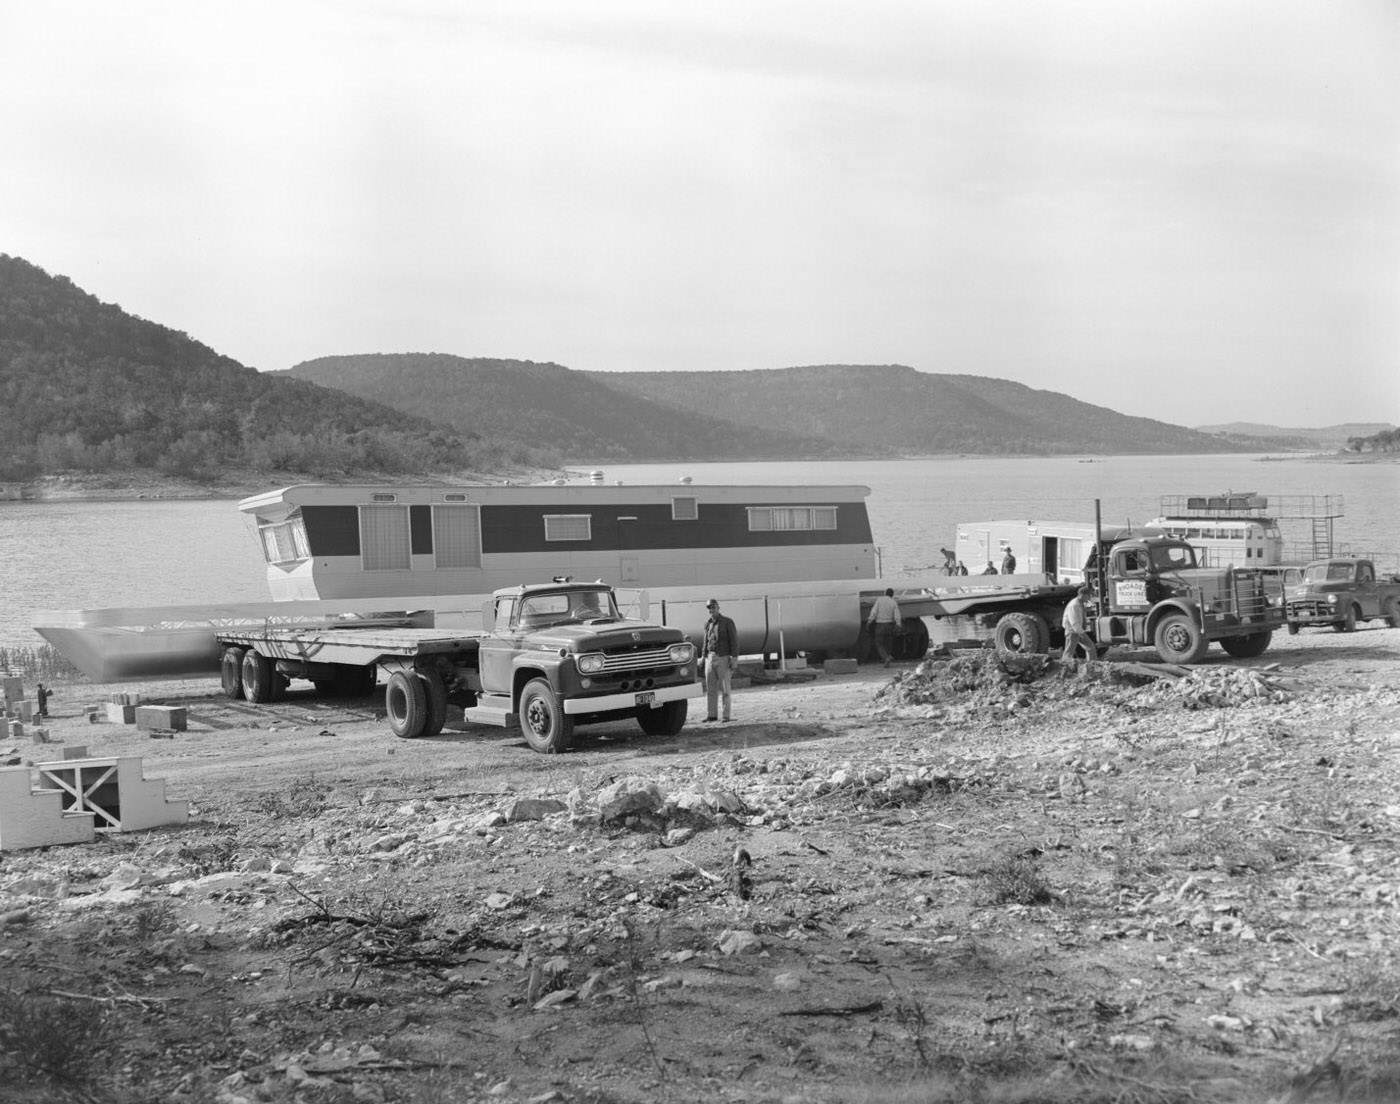 Houseboat Launching with Parked Trucks, 1958.